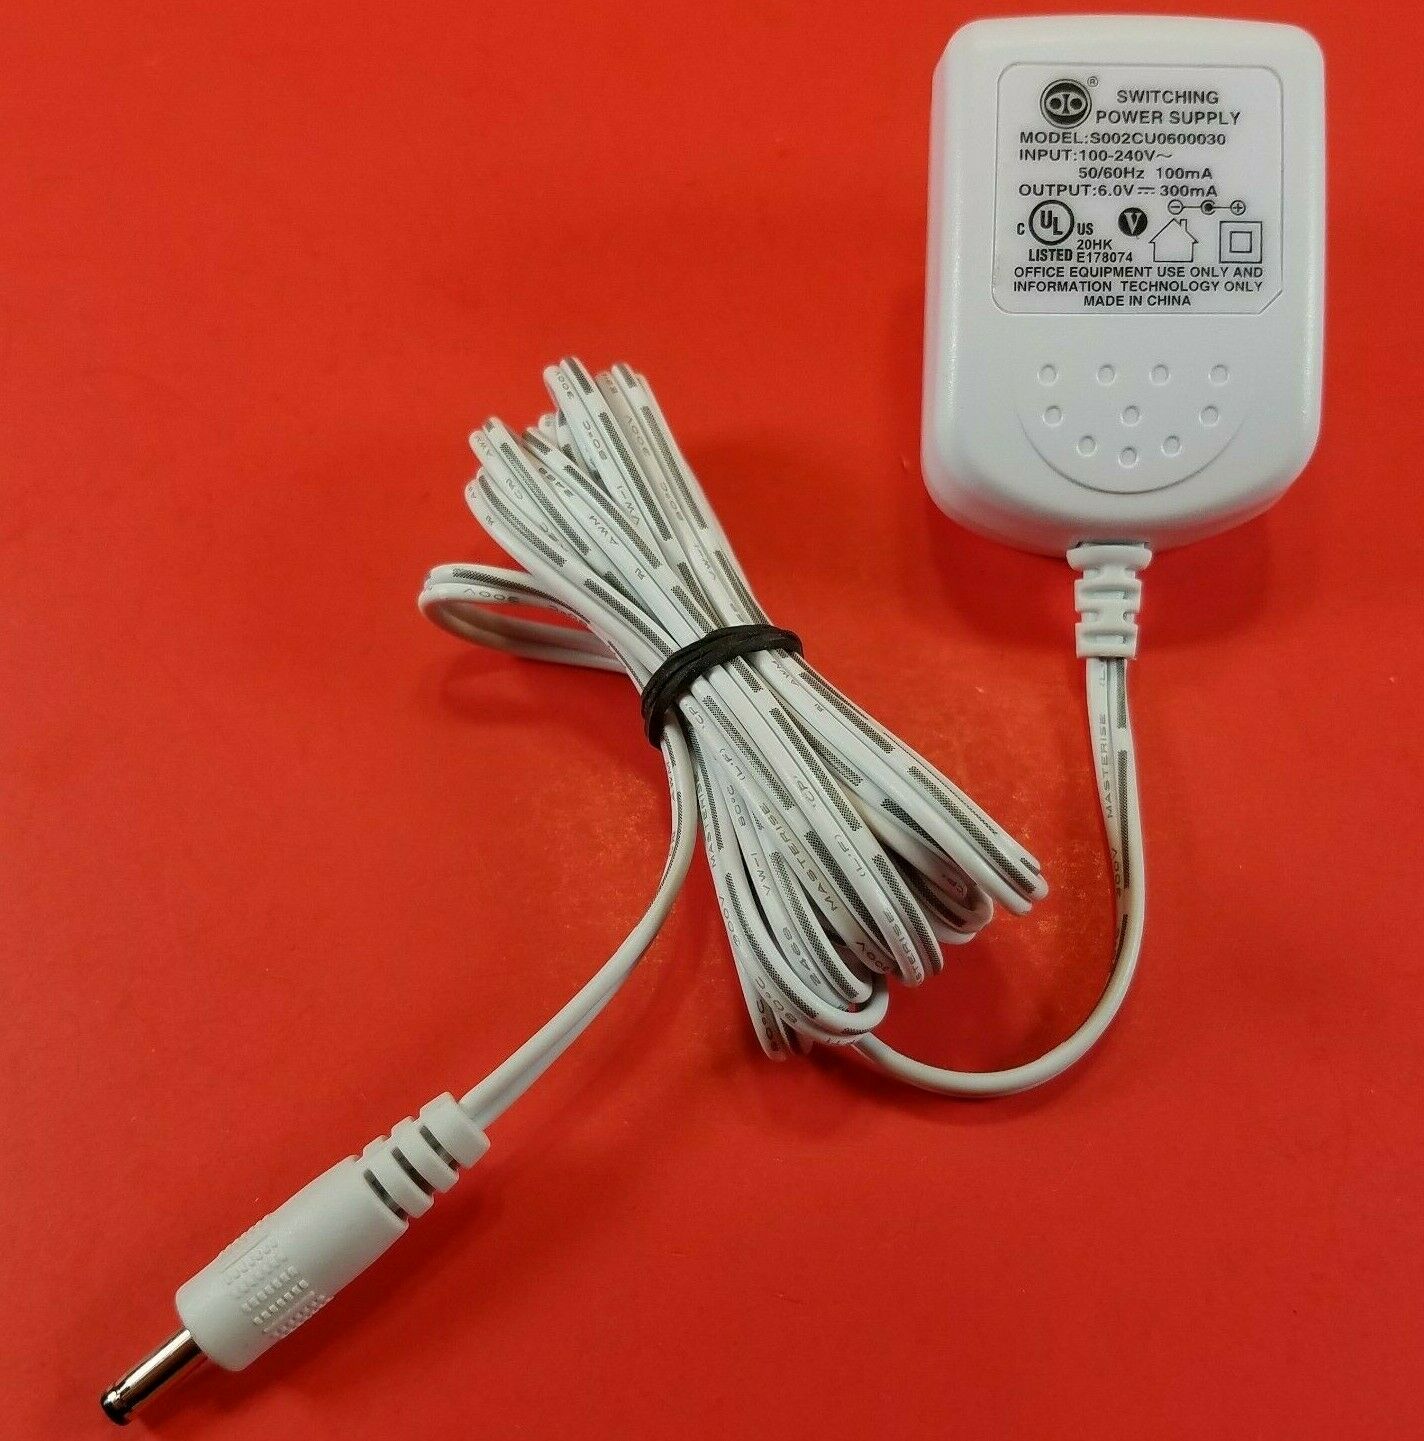 Switching Power Supply S002CU0500030 AC/DC Adapter 6V - 300mA Charger Adaptor Type: Switching Power Supply Features: